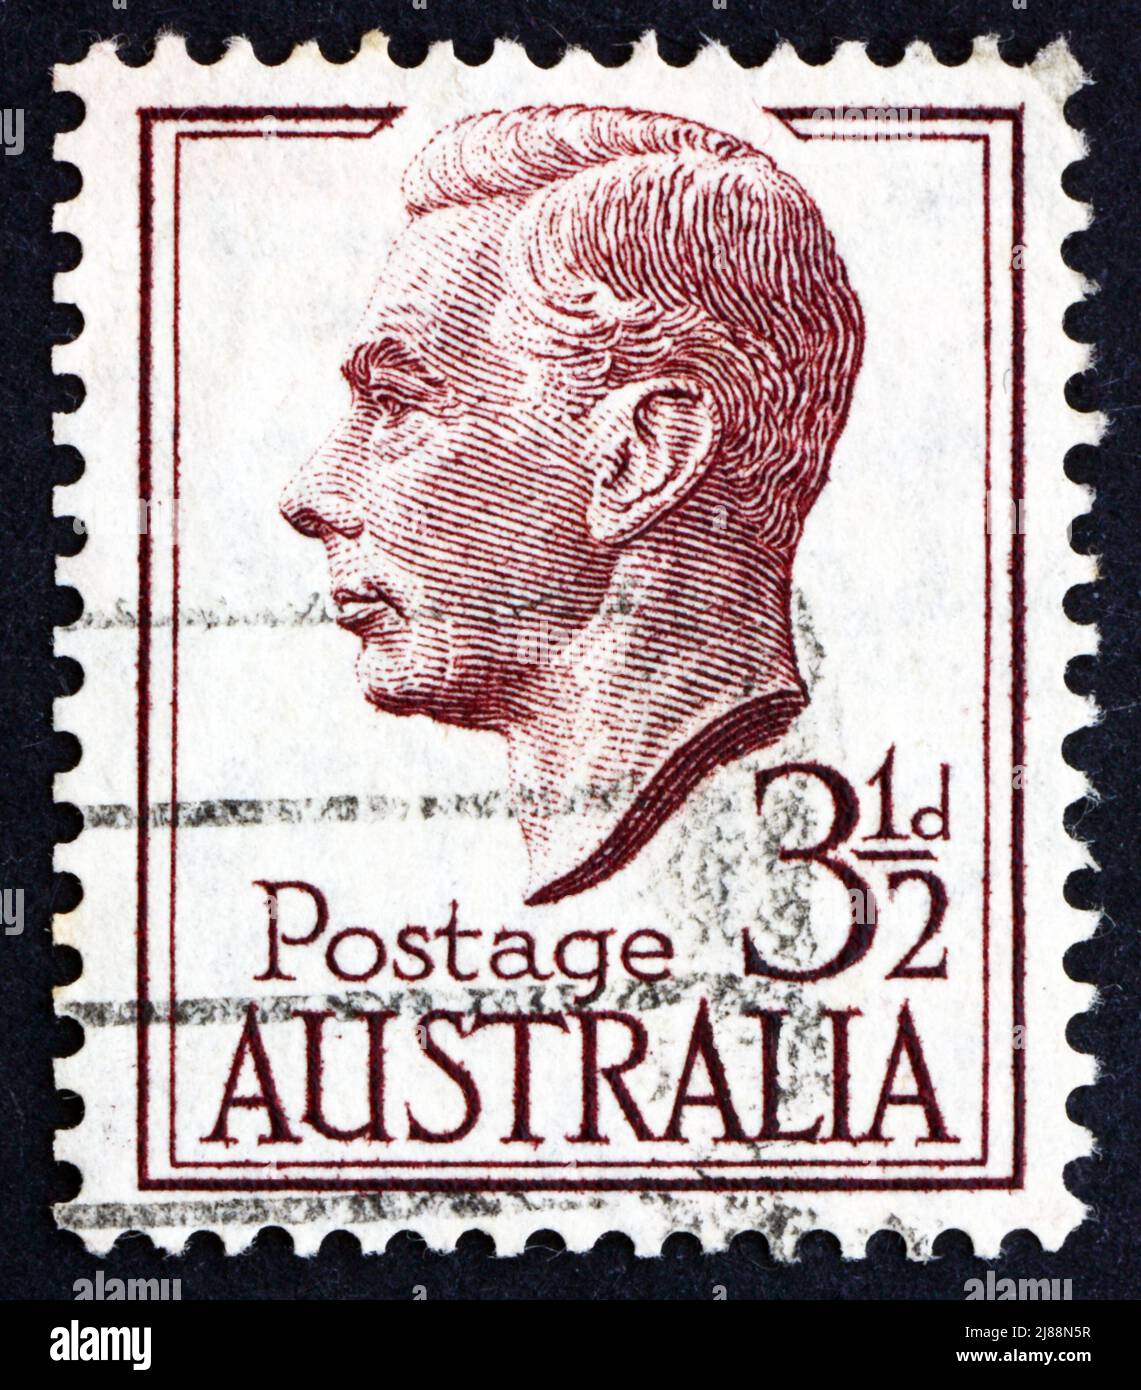 AUSTRALIA - CIRCA 1951: a stamp printed in the Australia shows George VI, King of the United Kingdom and the Dominions of the British Commonwealth, ci Stock Photo